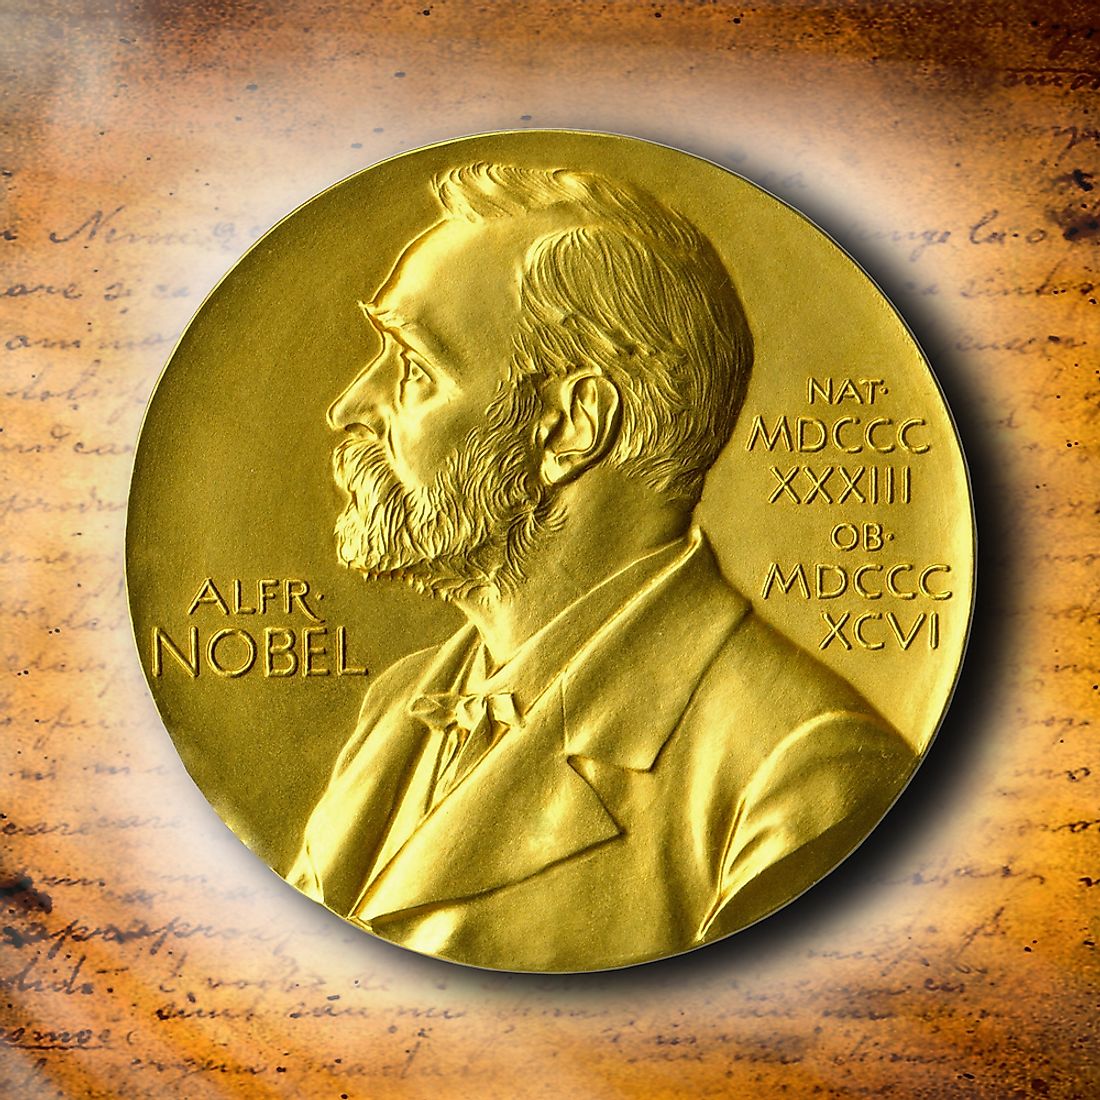 Who Was the Youngest Person to Ever Win the Nobel Prize? WorldAtlas